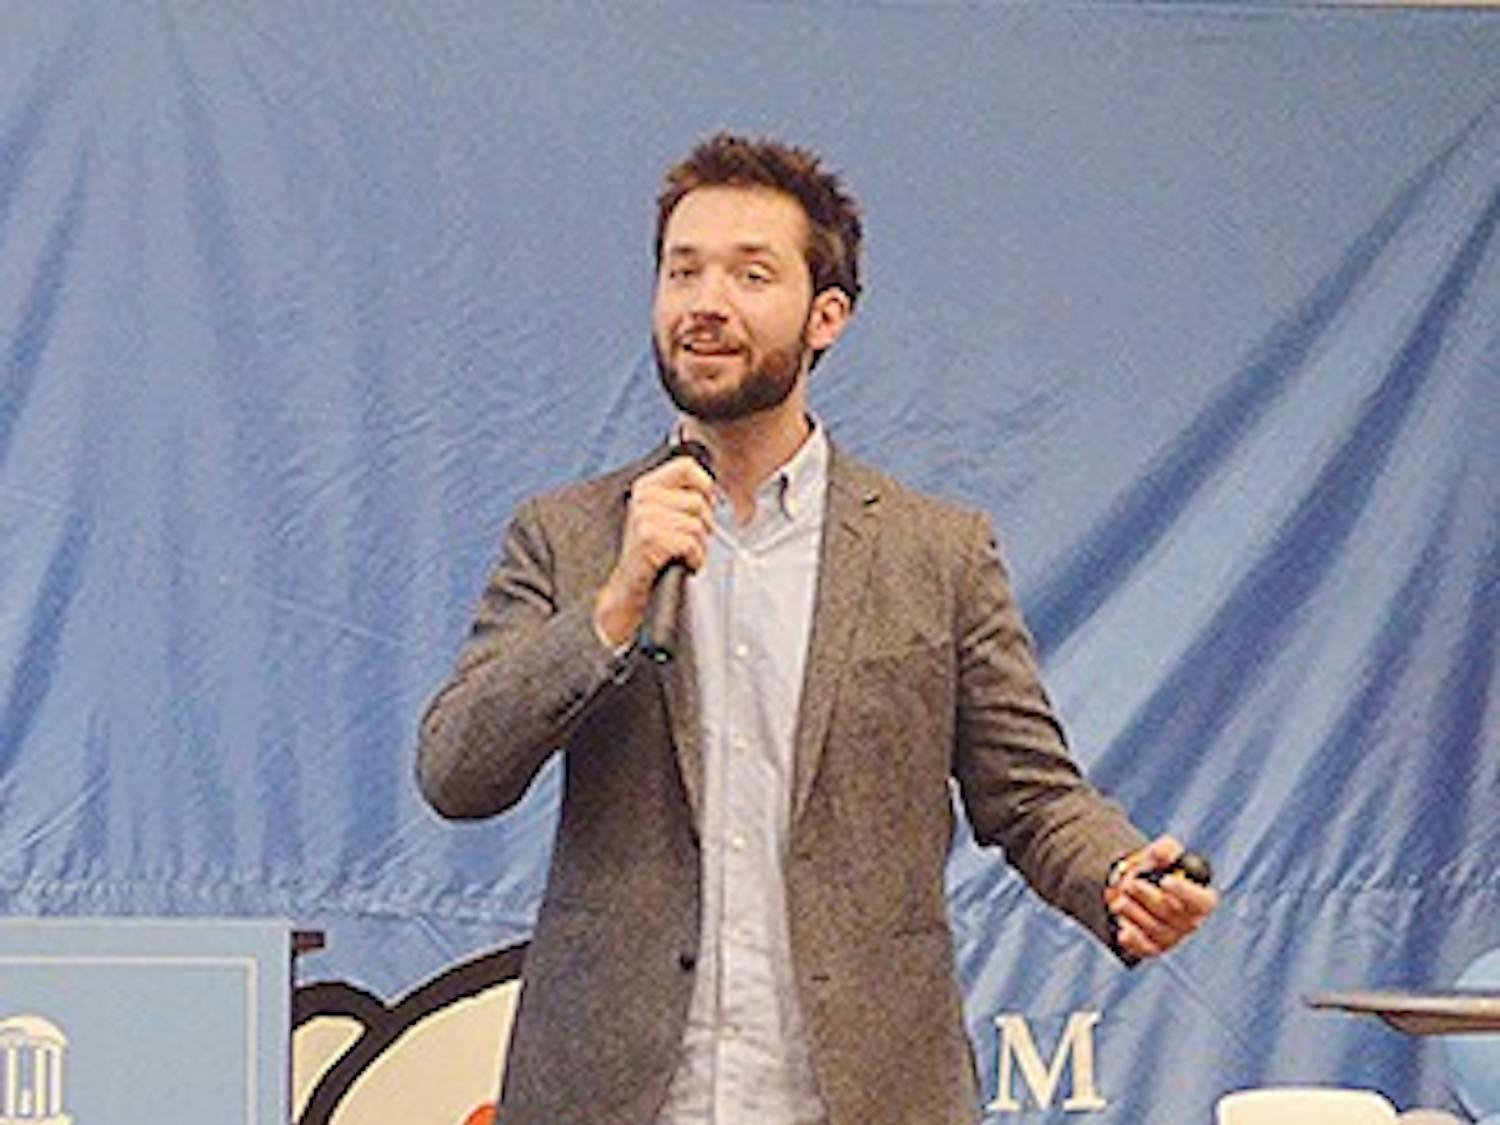 	Cofounder of Reddit Alexis Ohanian speaks at UNC’s School of Journalism and Mass Communication Monday night about the Internet as an enabler.